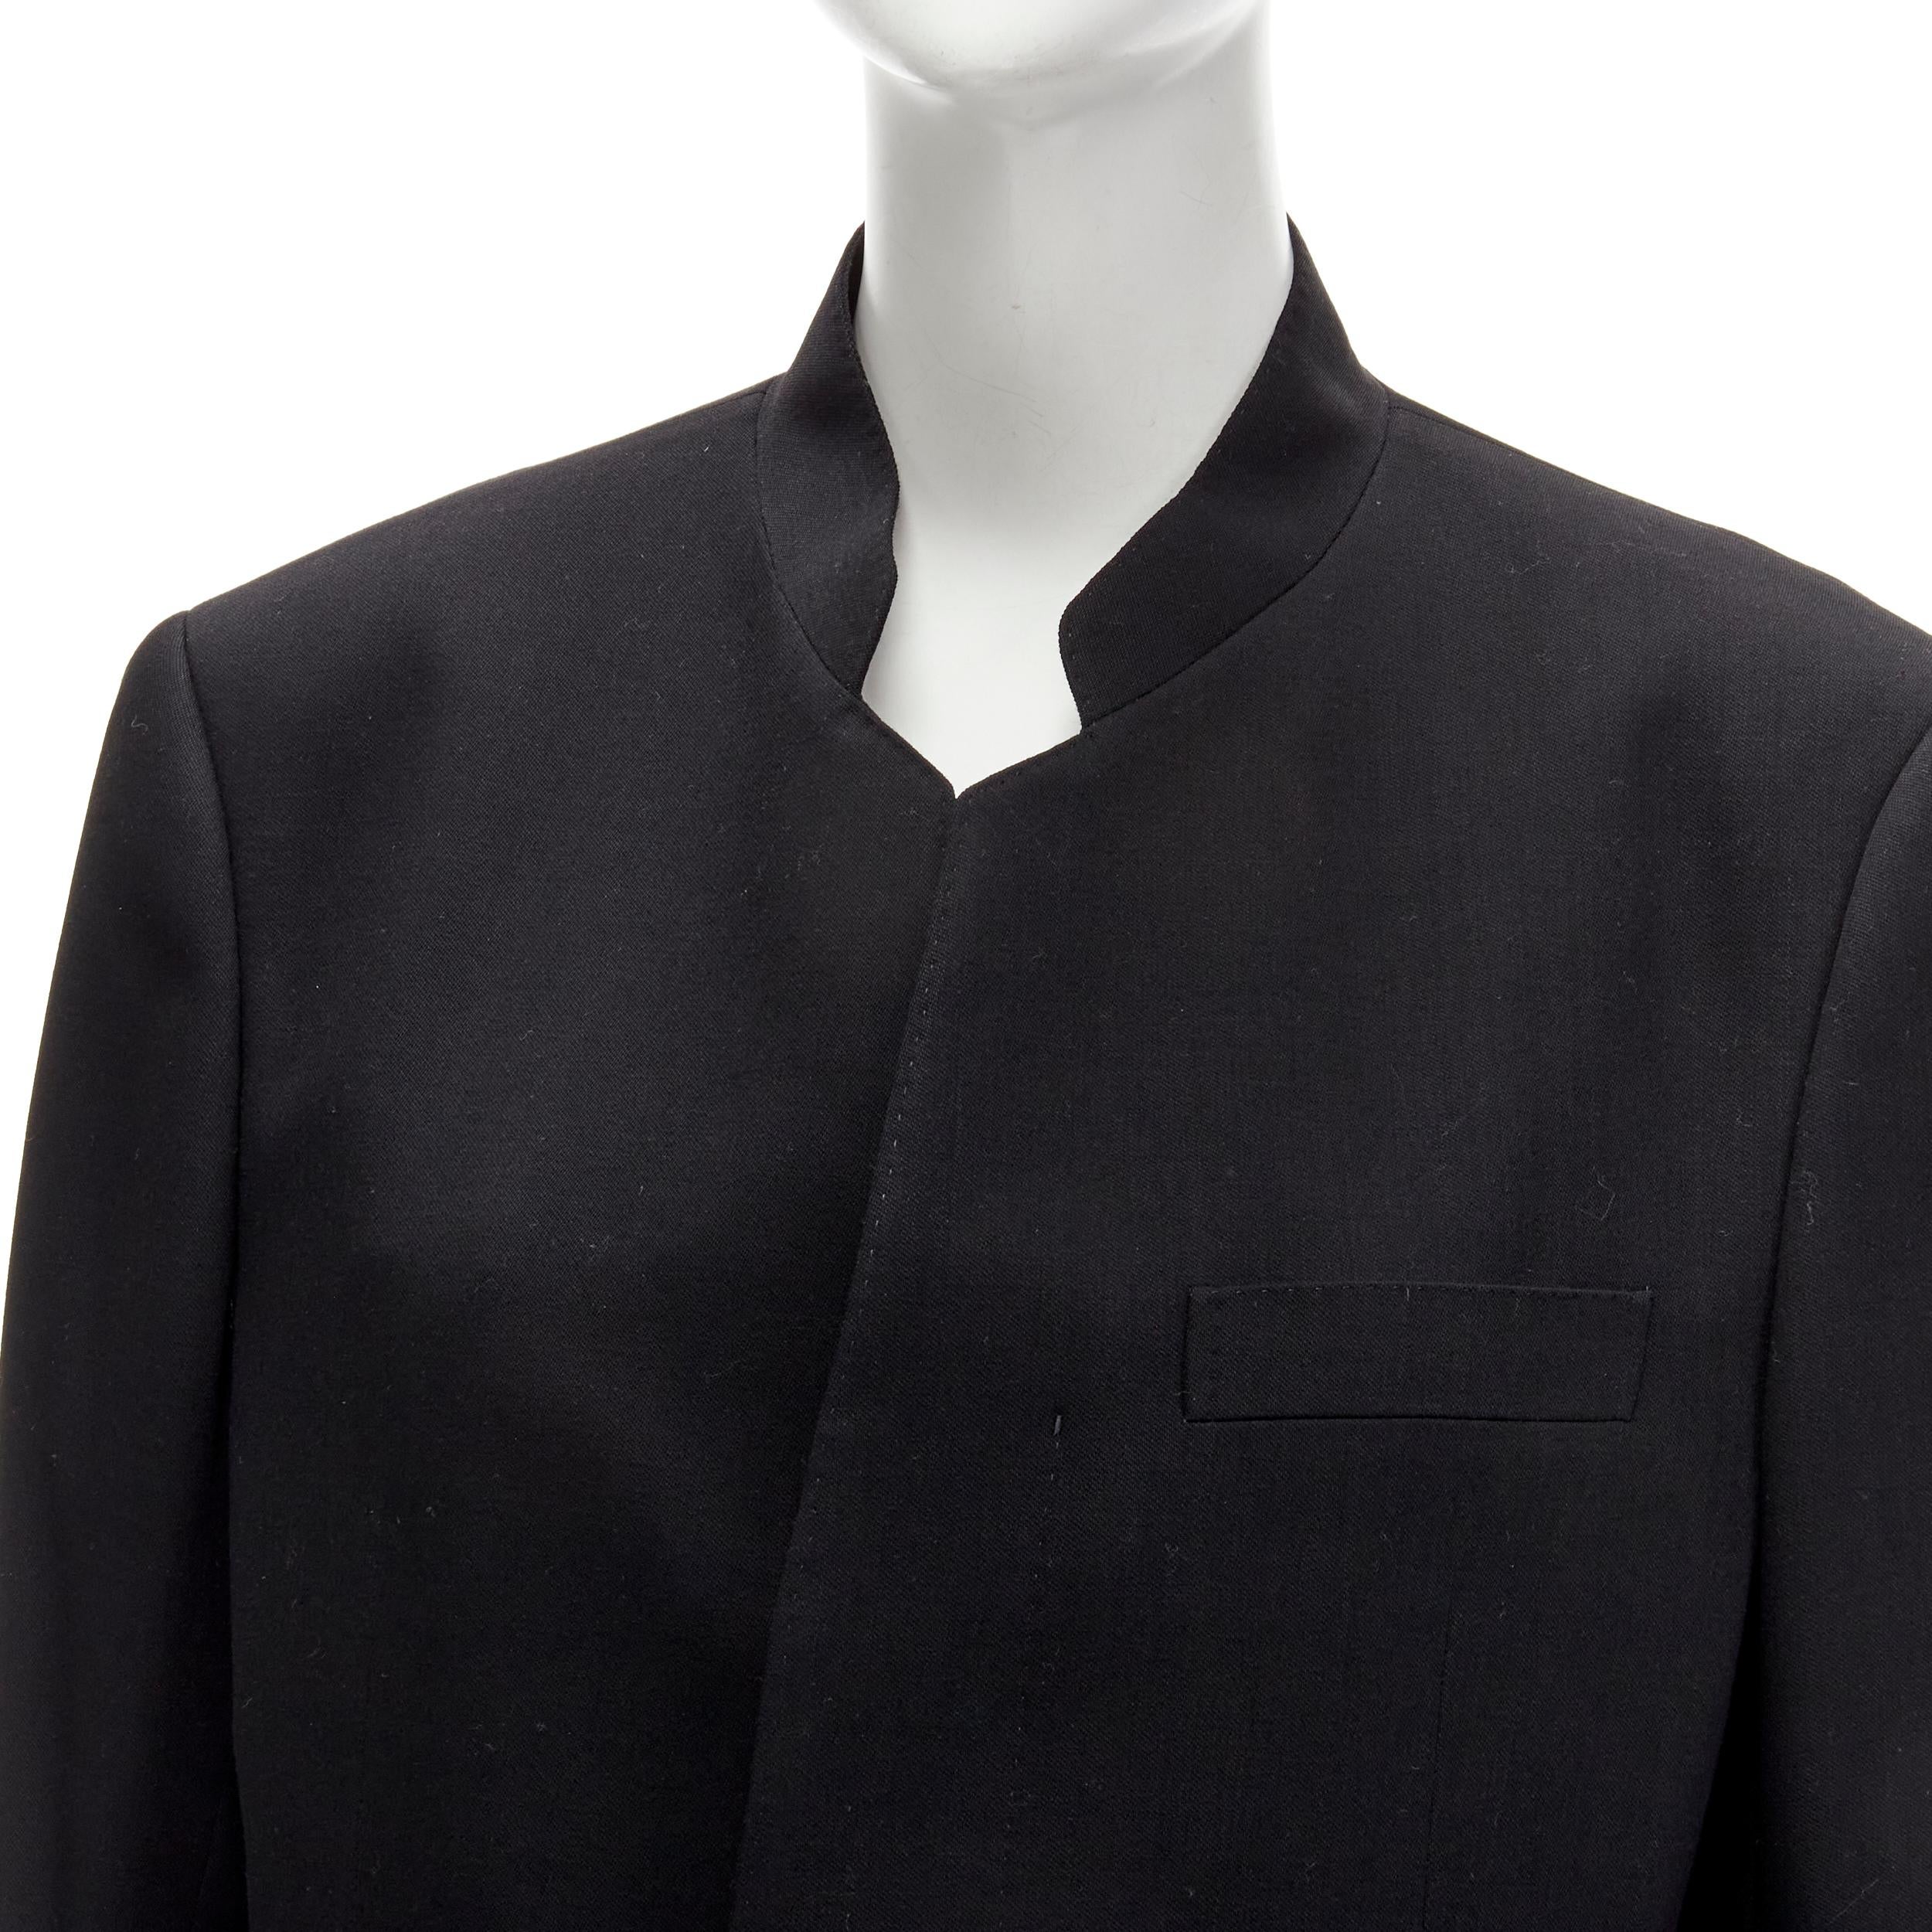 ISSEY MIYAKE black 100% wool minimal classic stand collar blazer JP1 S
Reference: BMPA/A00243
Brand: Issey Miyake
Material: Wool
Color: Black
Pattern: Solid
Closure: Button
Lining: Fabric
Extra Details: Best for minimalistic looks.
Made in: